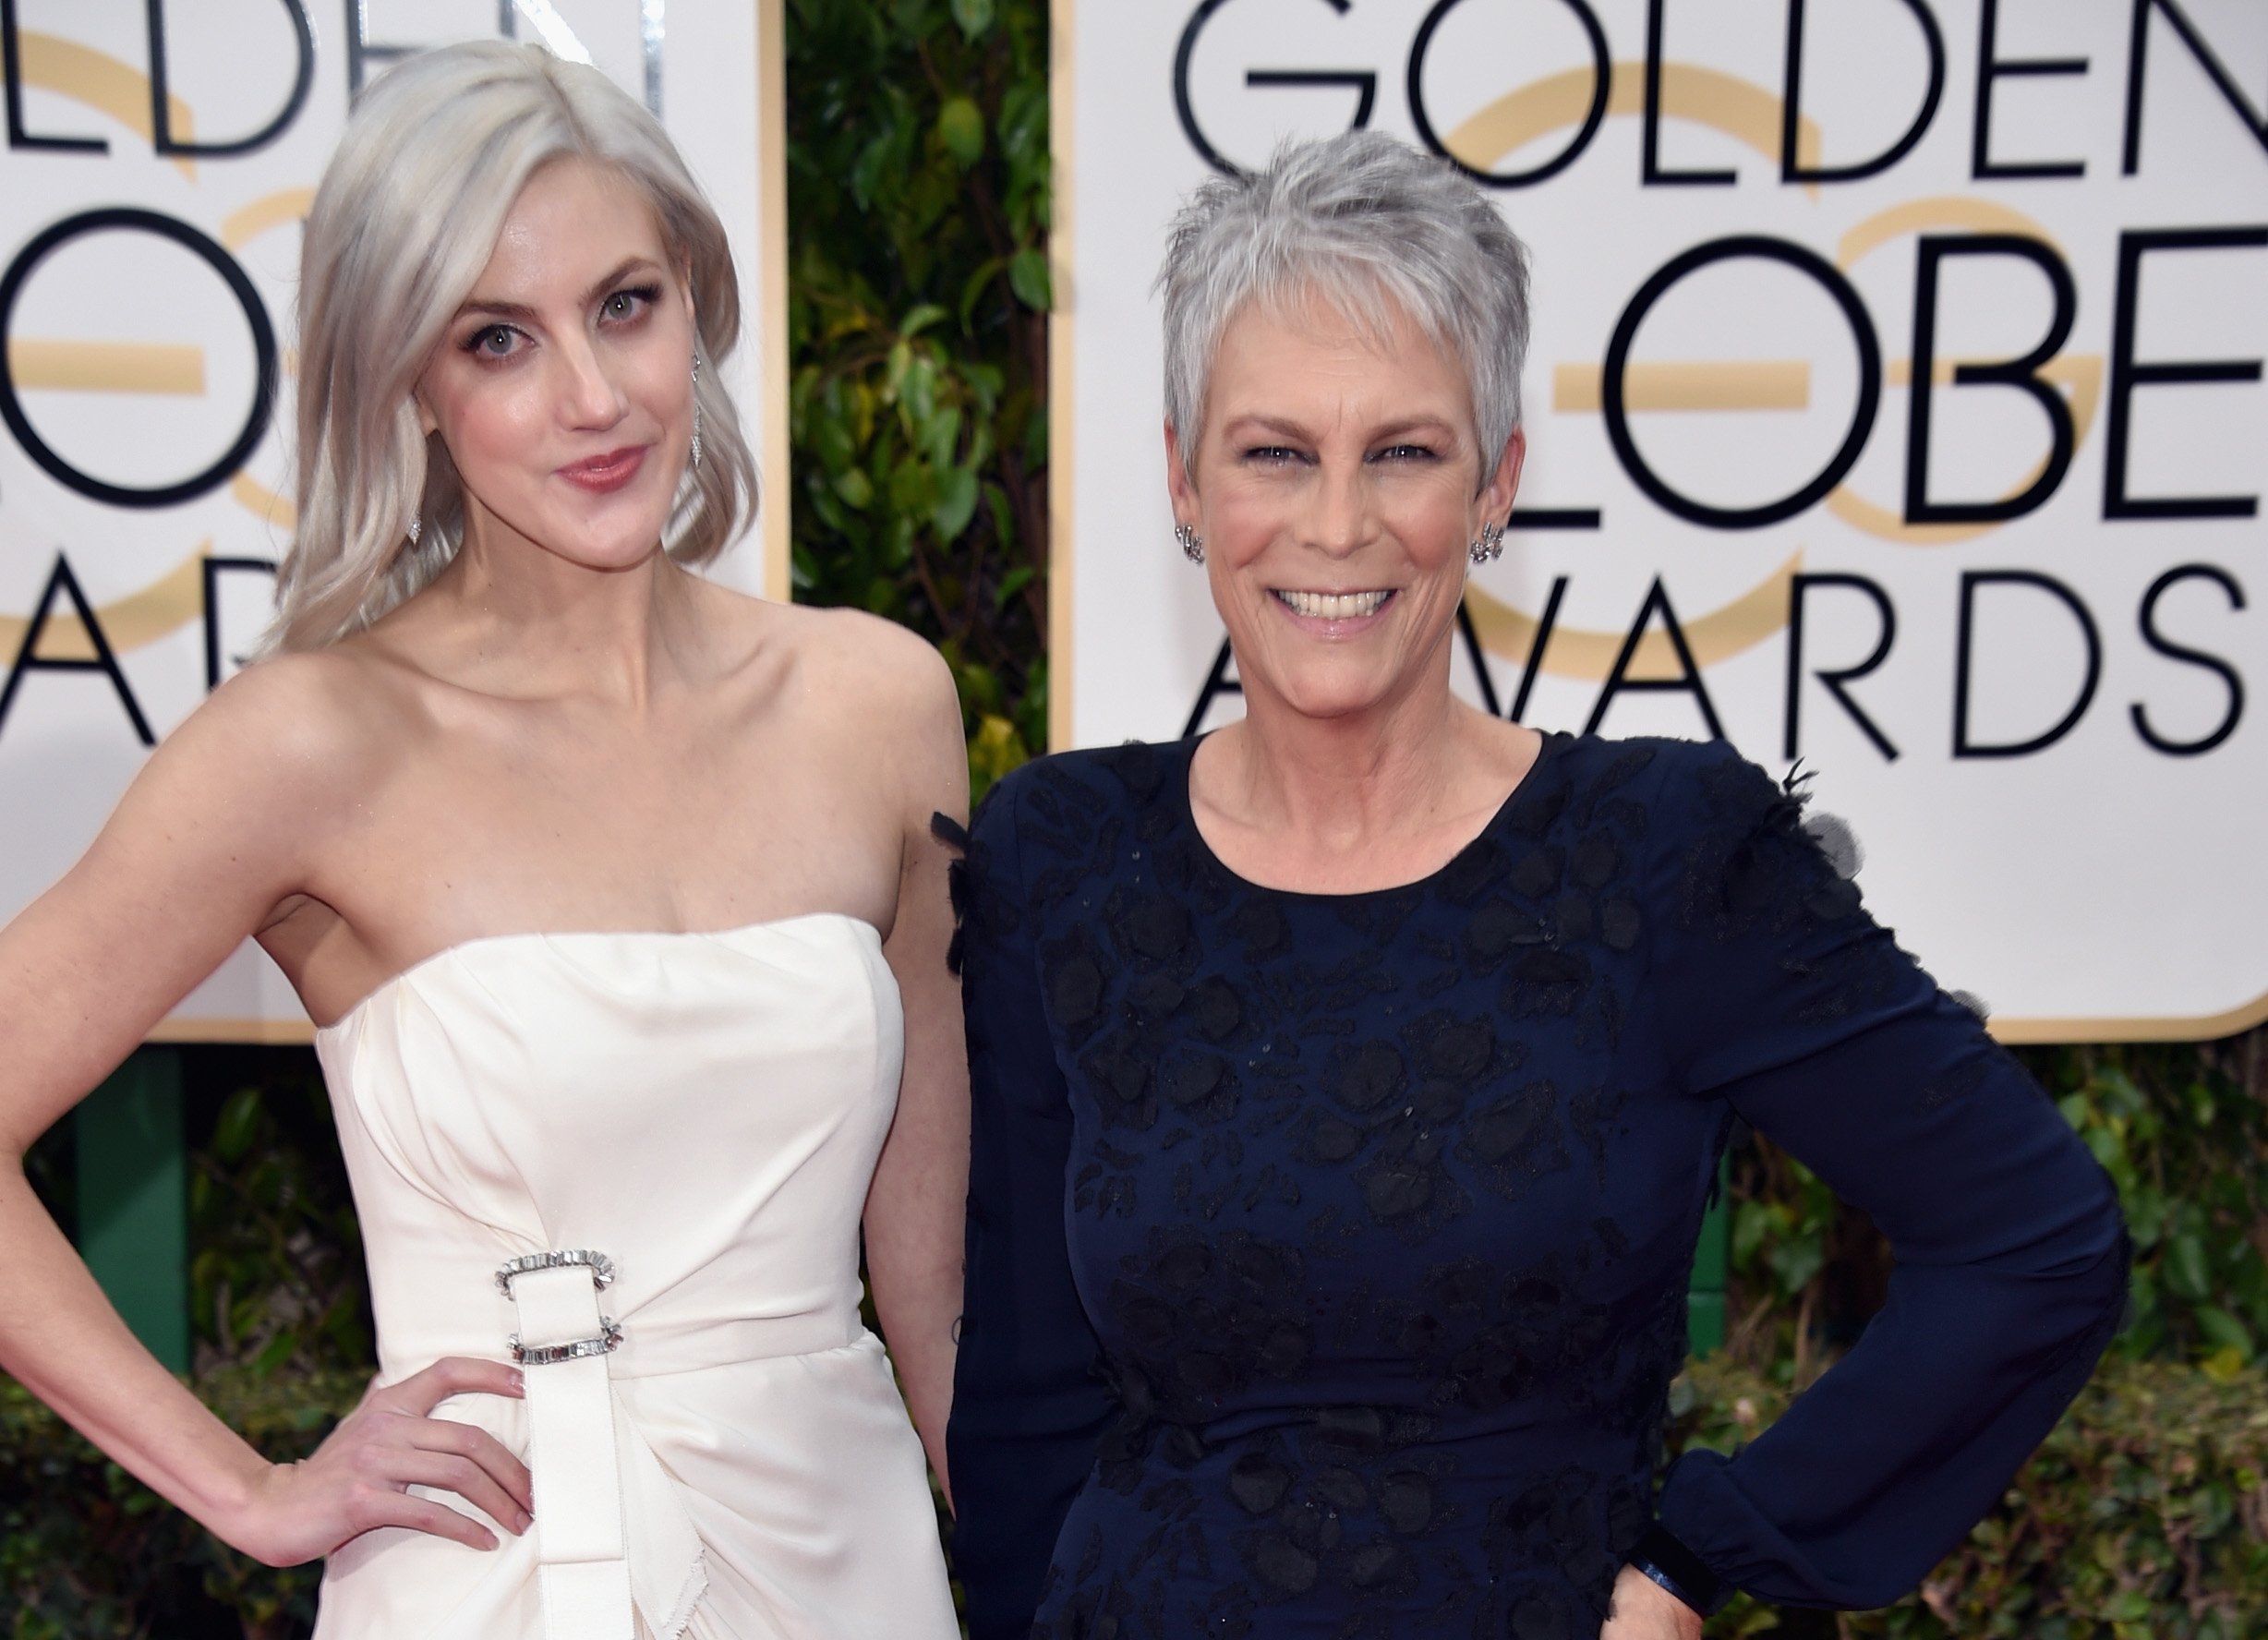 Annie Guest and Jamie Lee Curtis at the 73rd Annual Golden Globe Awards on January 10, 2016 in Beverly Hills. | Source: Getty Images